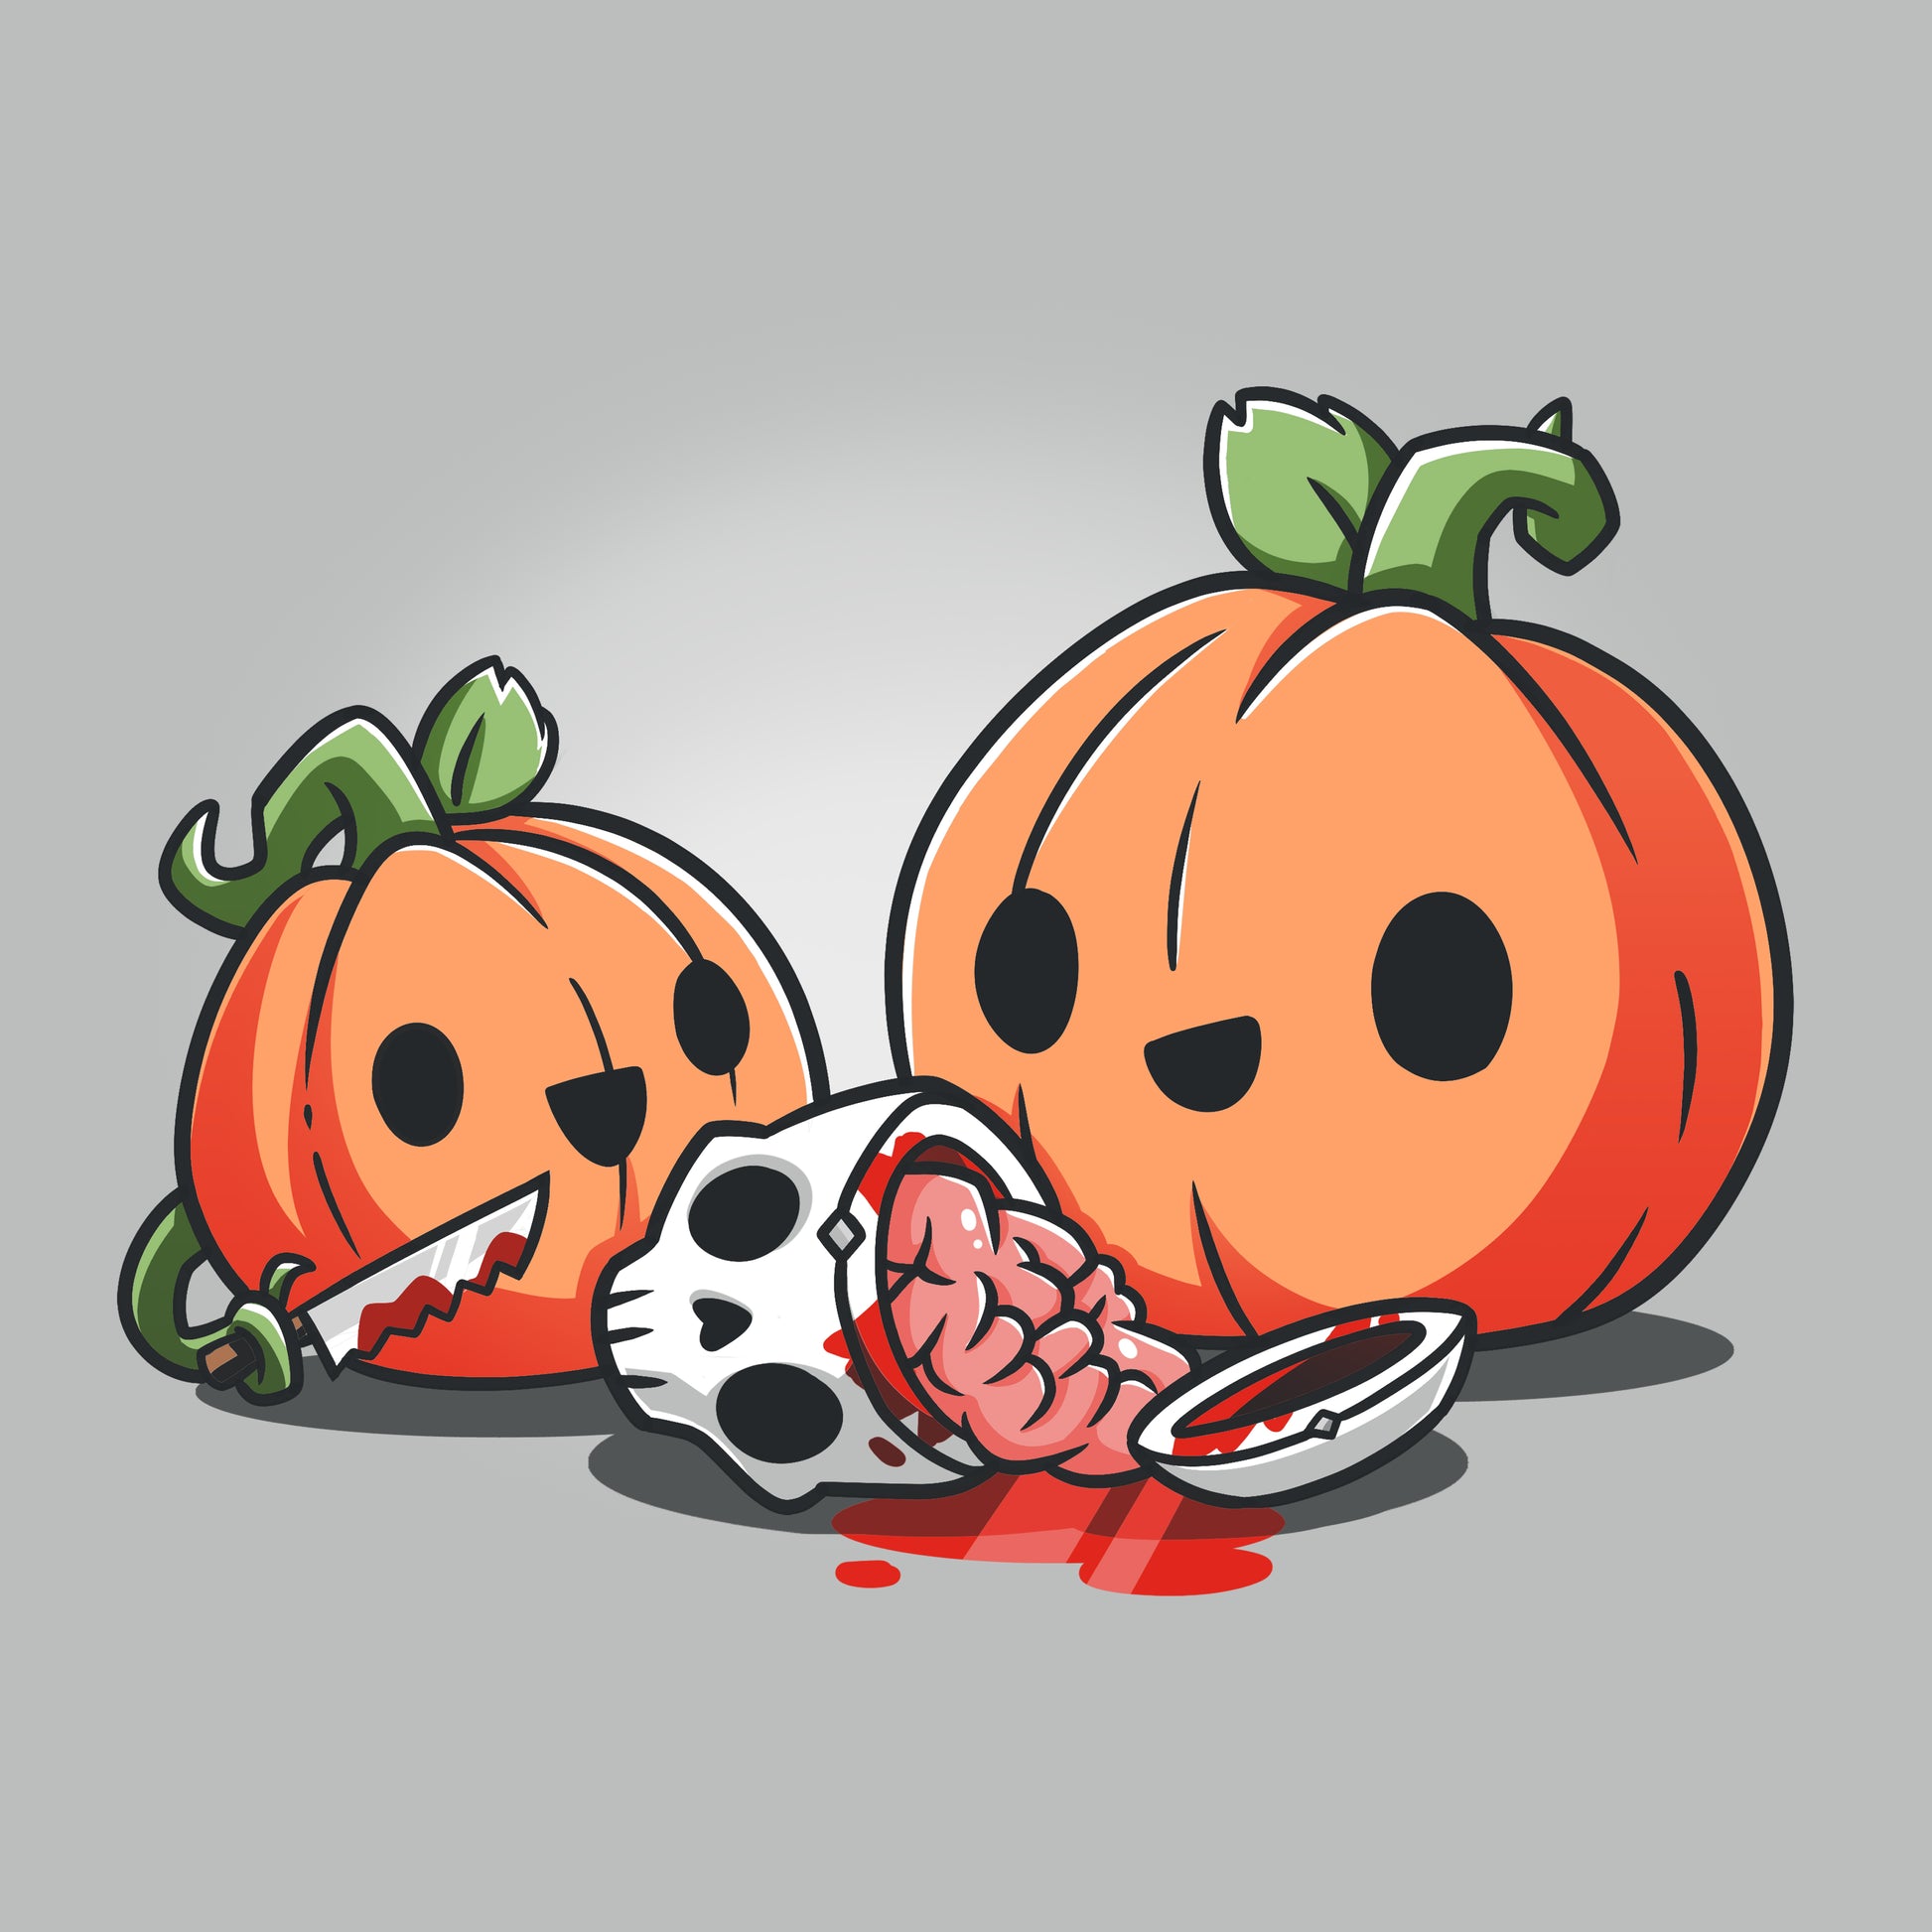 Two cartoon pumpkins with happy faces, one holding a knife, next to a skull with exposed brain and blood on the ground. Perfect for Halloween or true crime documentary enthusiasts, this Pumpkin Carving t-shirt by monsterdigital is made from super soft ringspun cotton for ultimate comfort.